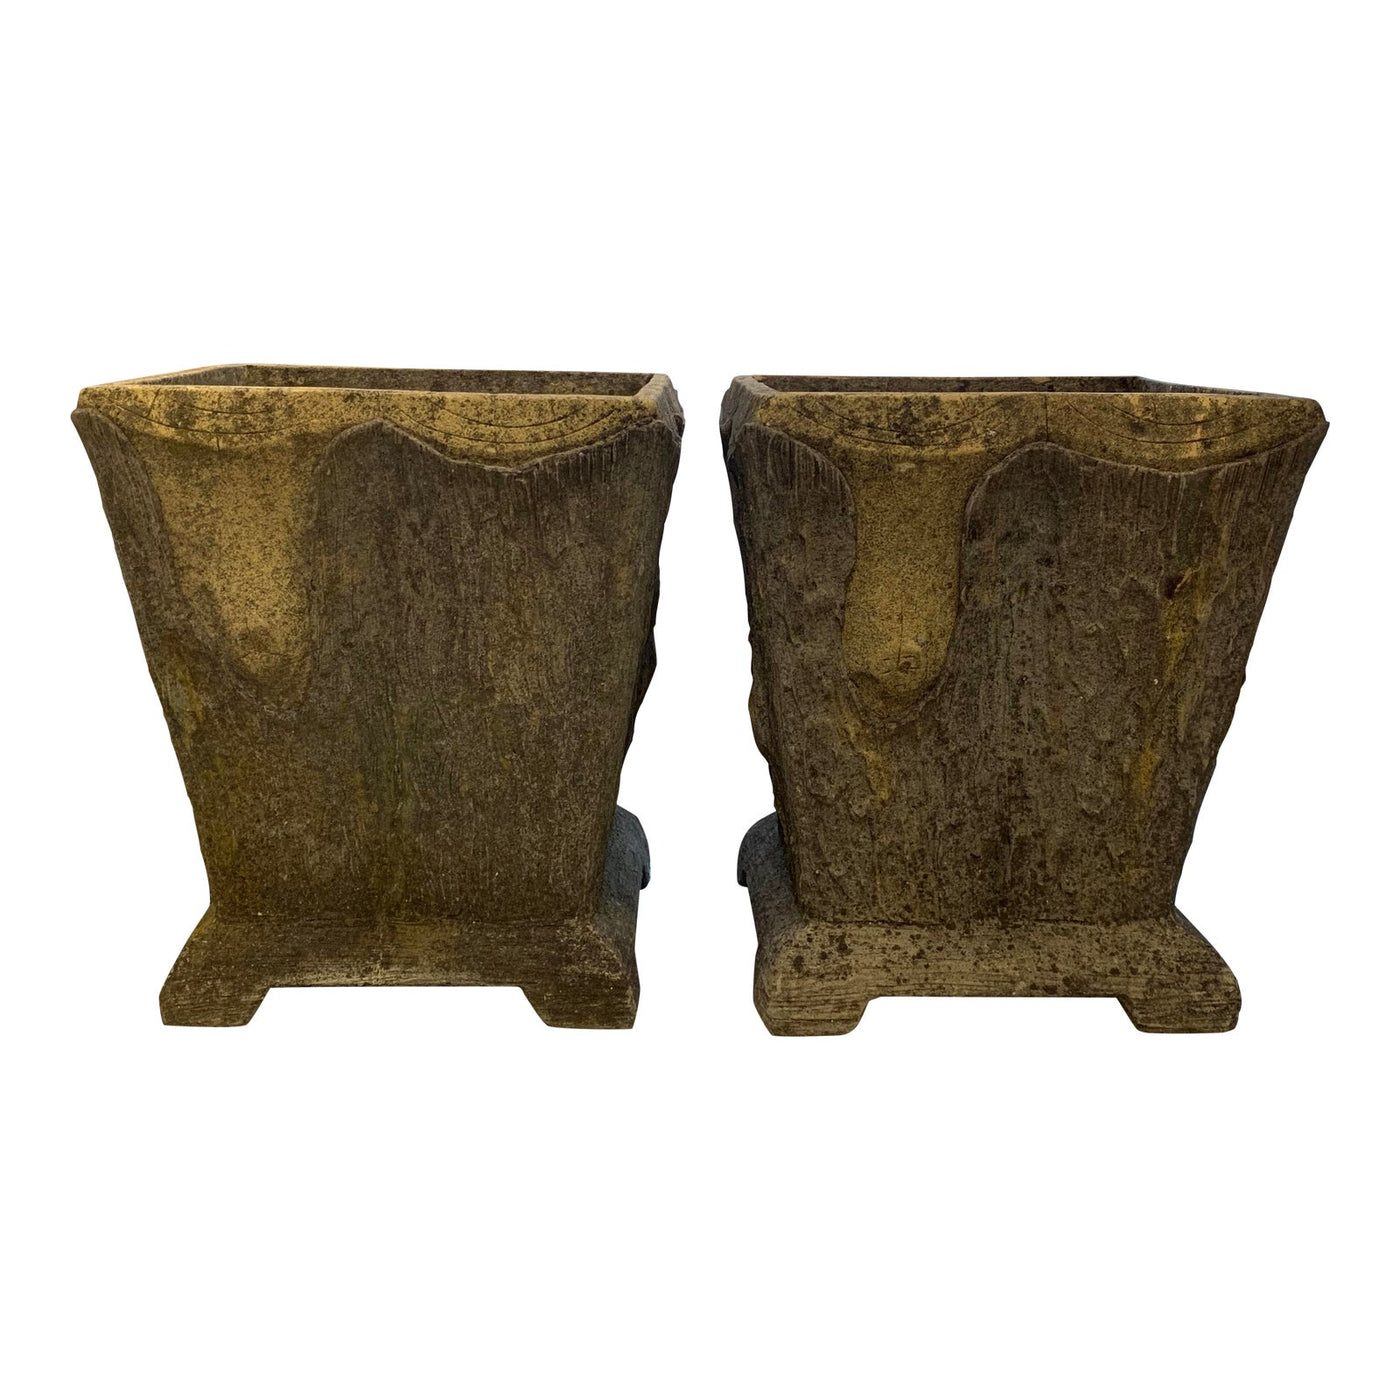 20th Century French Faux Bois Planters- A Pair